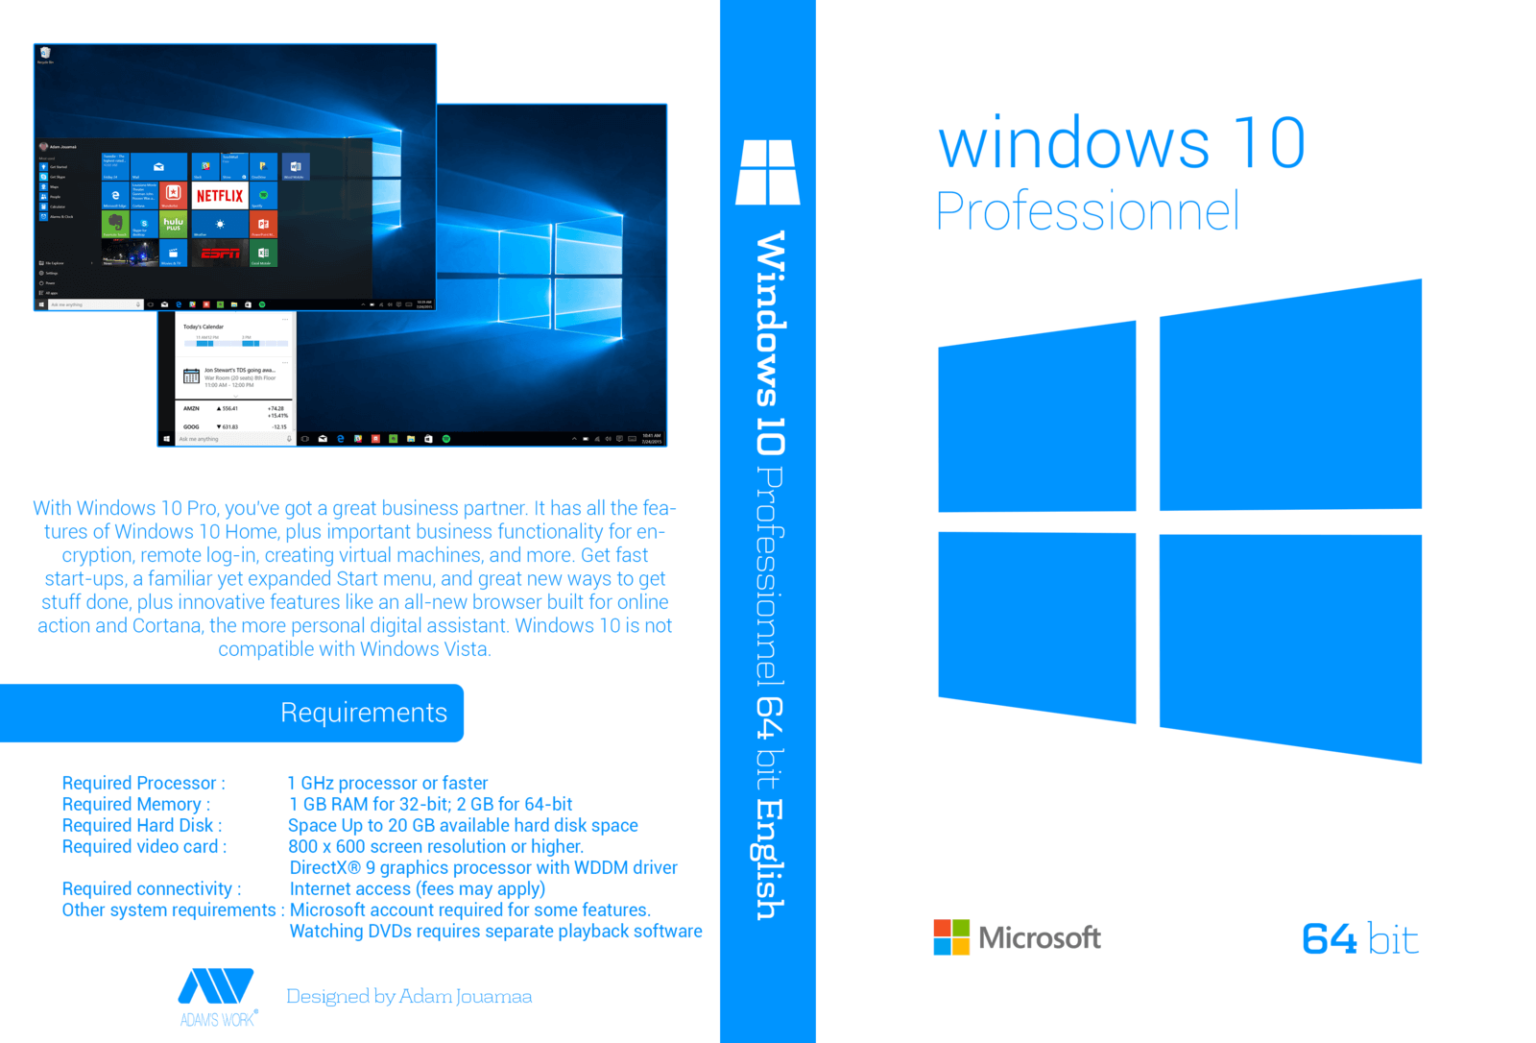 download windows 10 iso 64 bit with crack full version